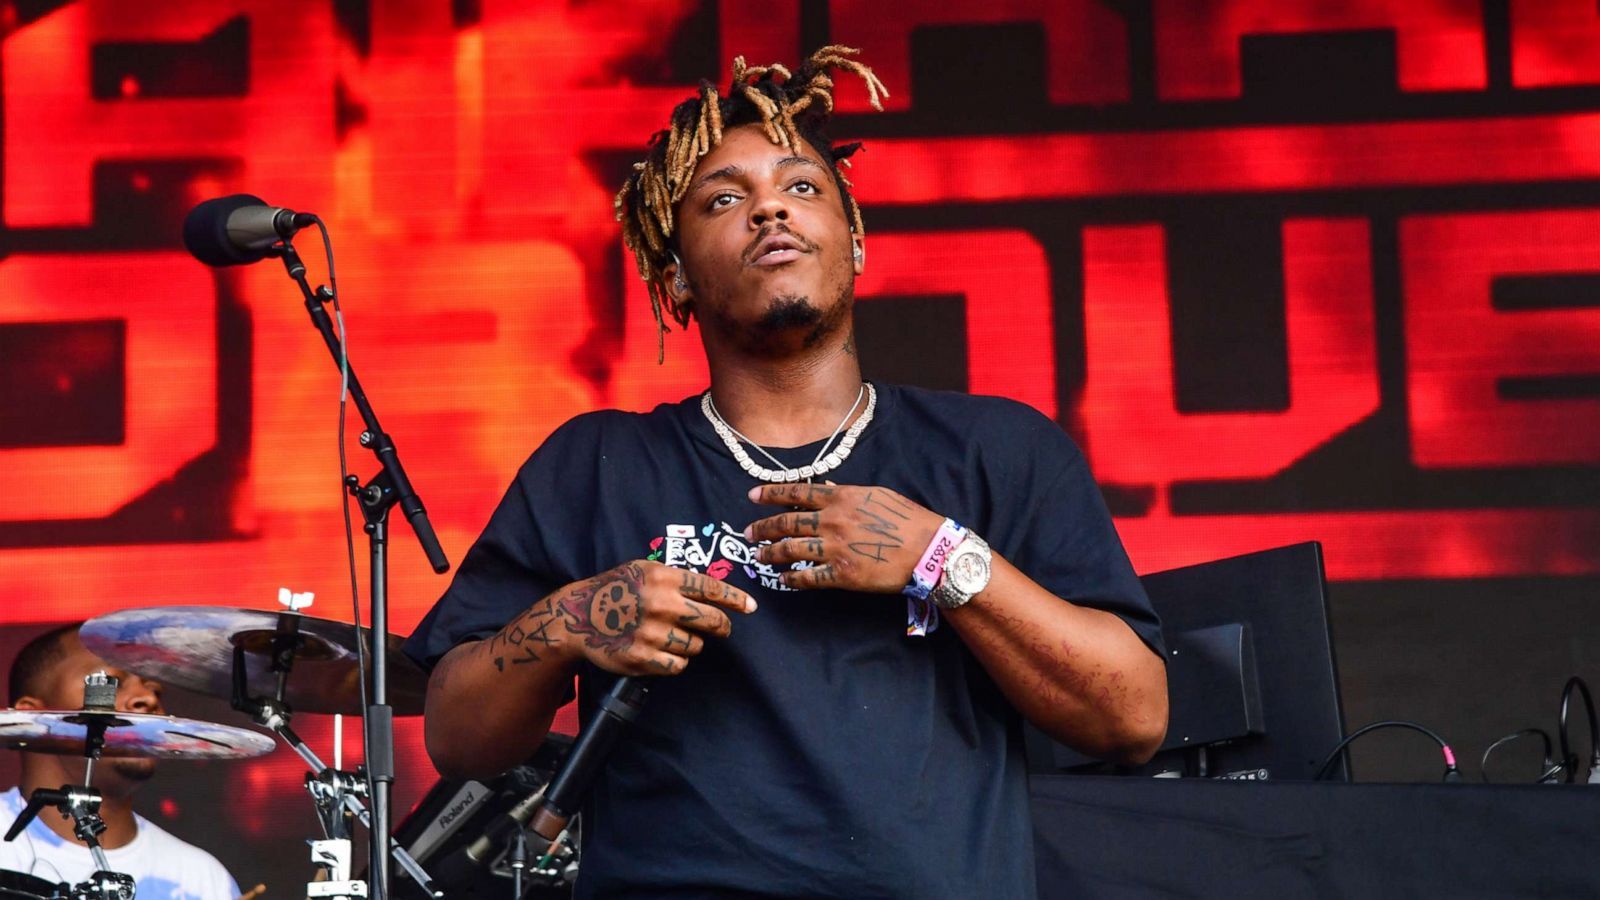 Rapper Juice WRLD dead after suffering medical emergency at Chicago's Midway Airport